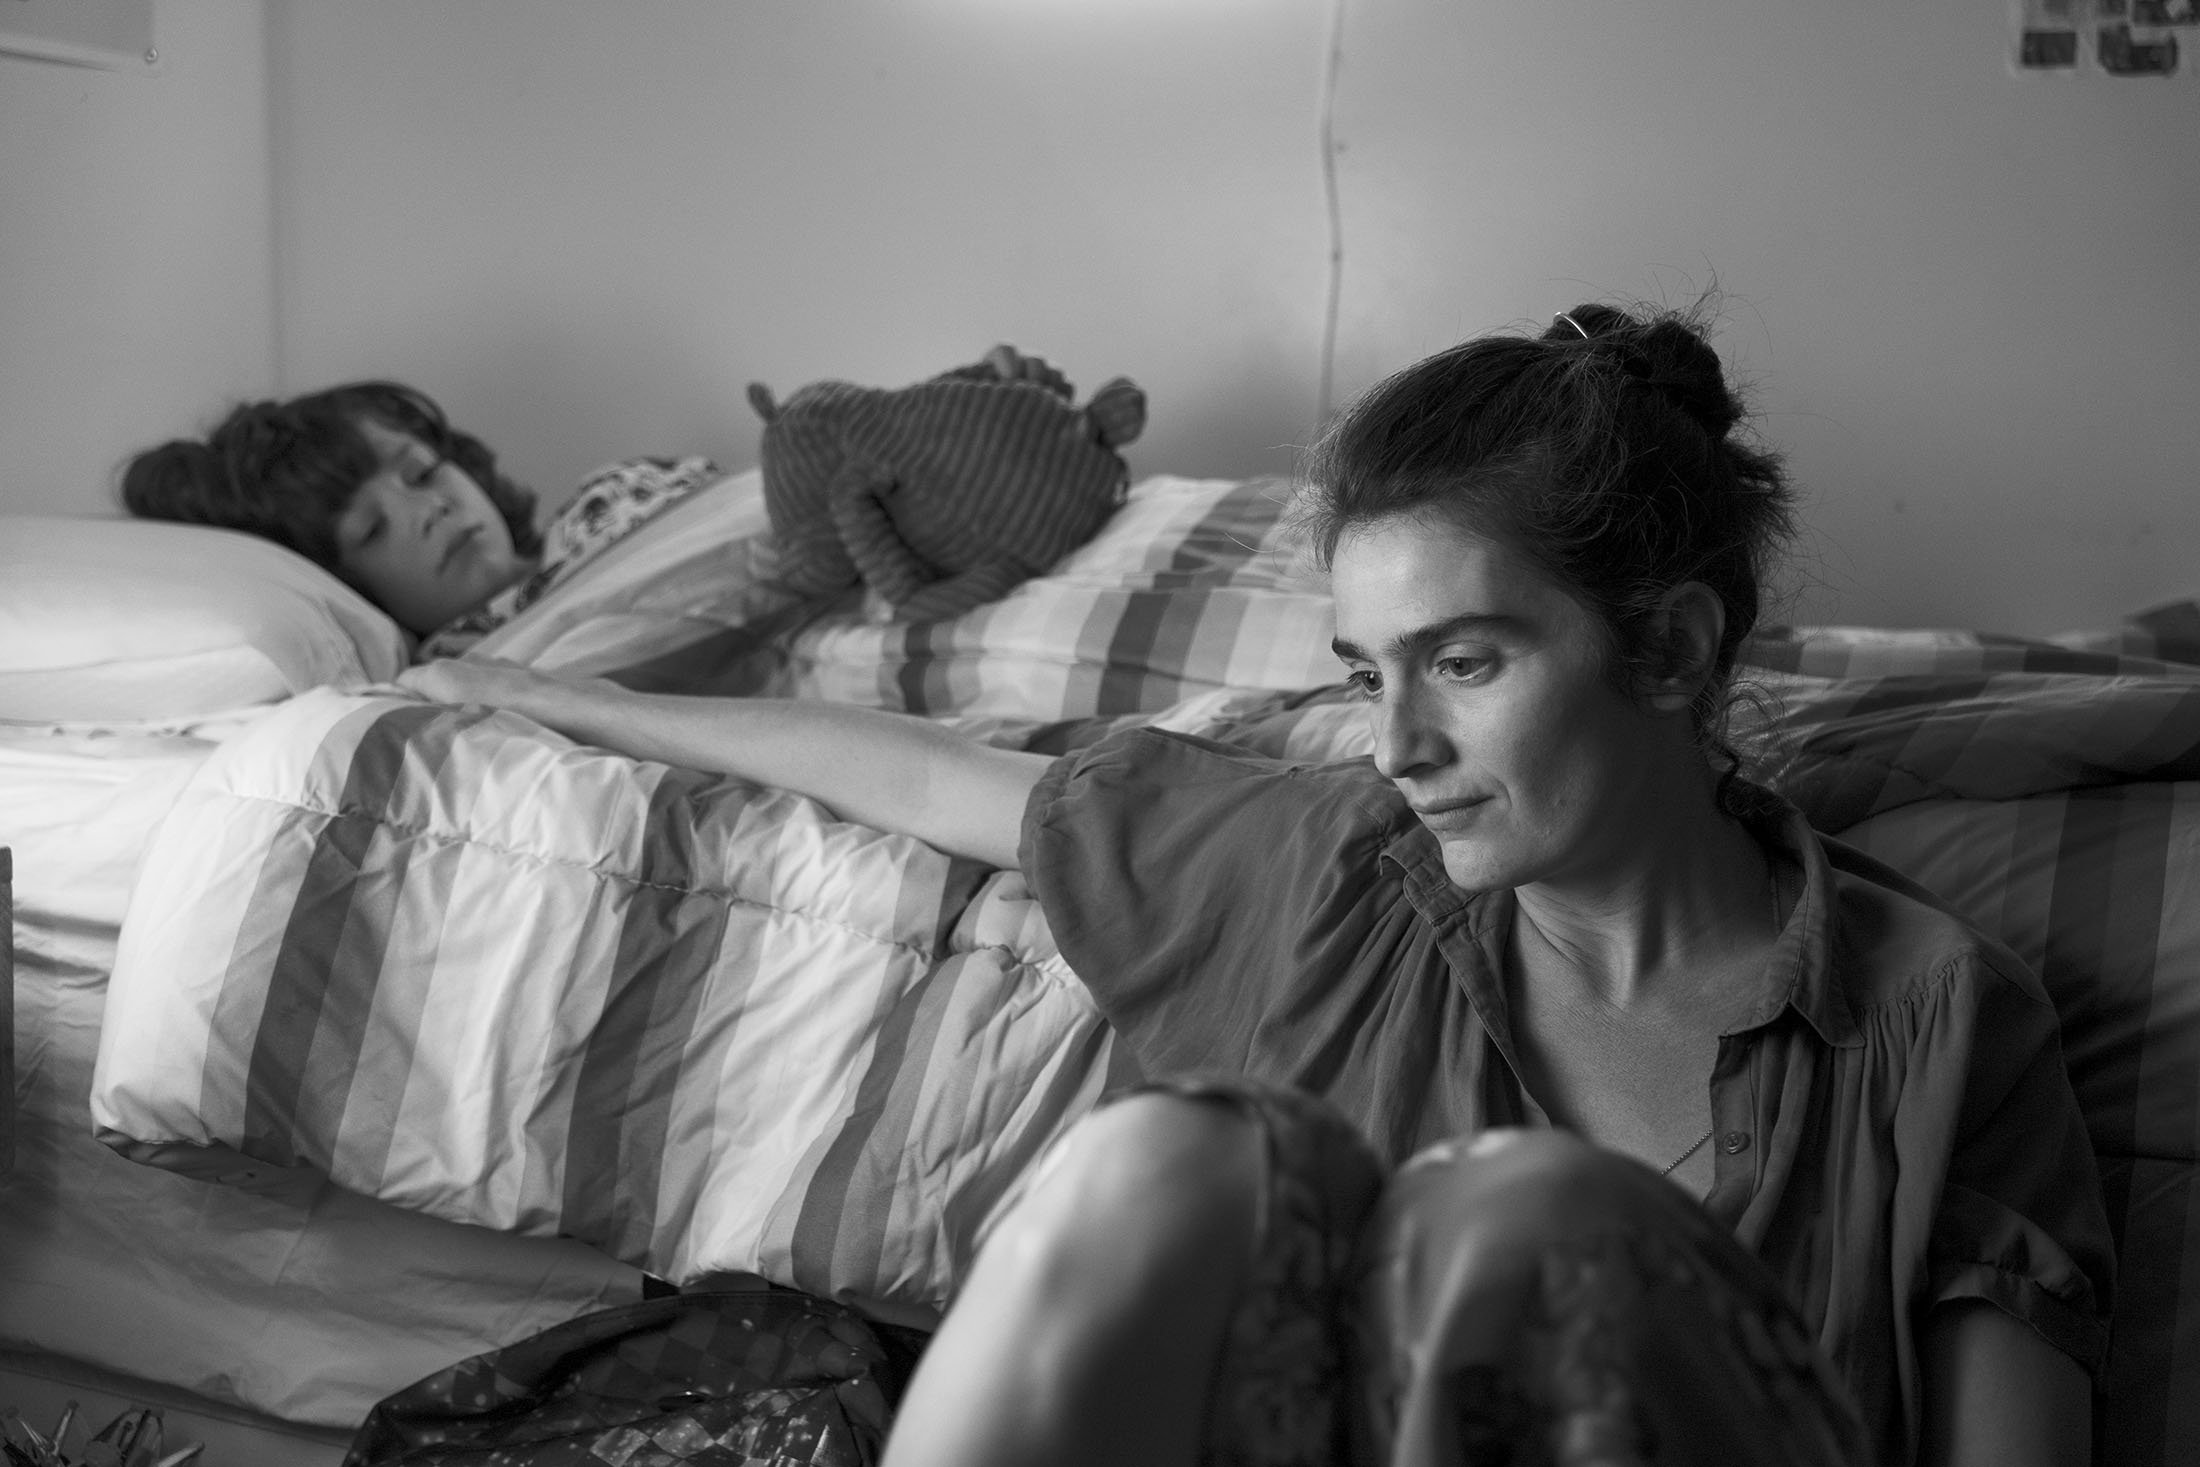 Woody Norman (L), and Gaby Hoffmann, in a scene from the film "C'mon C'mon." (A24 Films via AP)